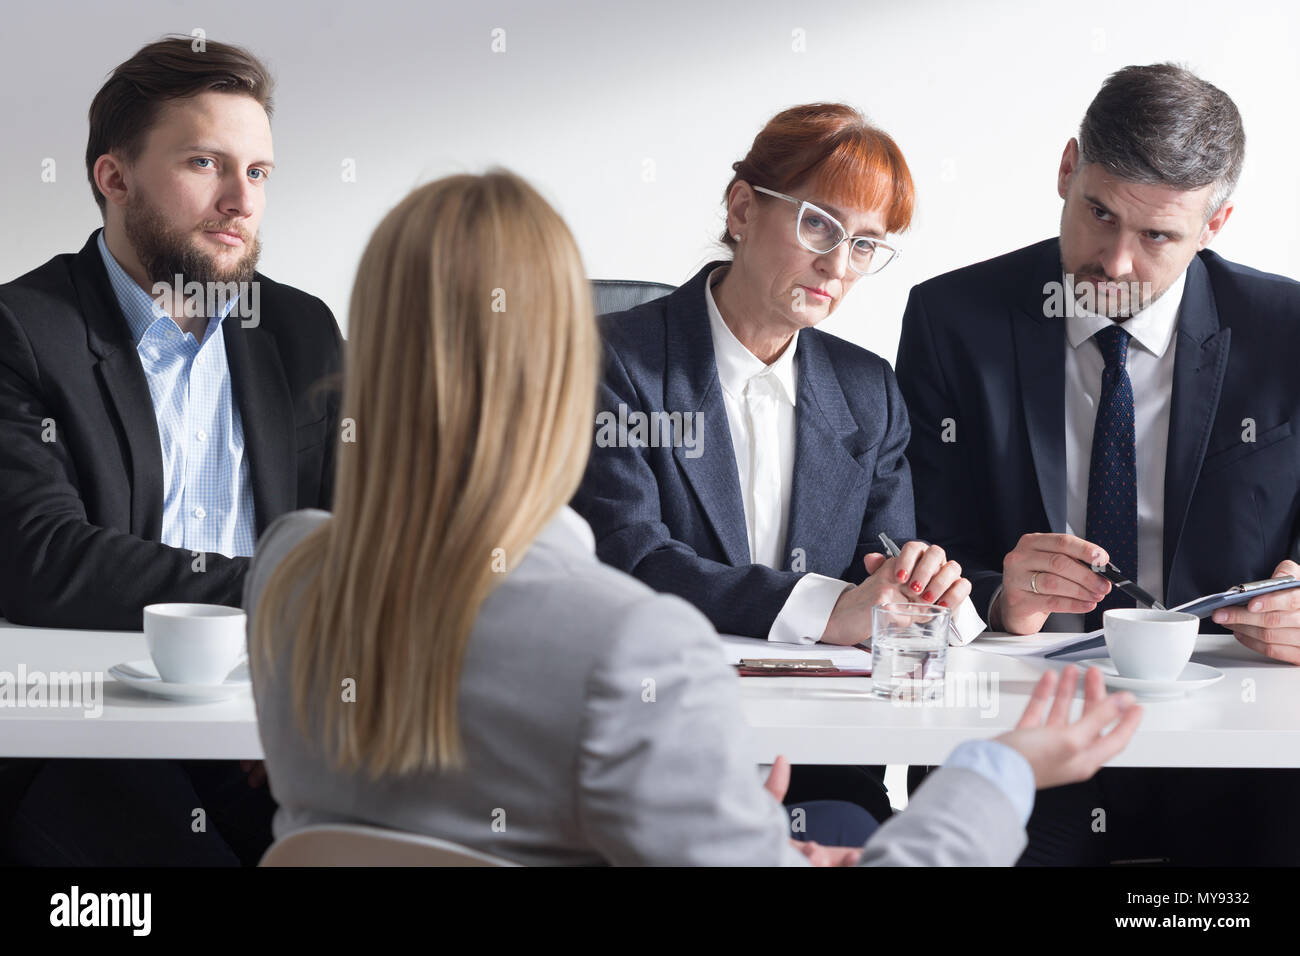 Woman back view during interview and three corporate workers Stock Photo